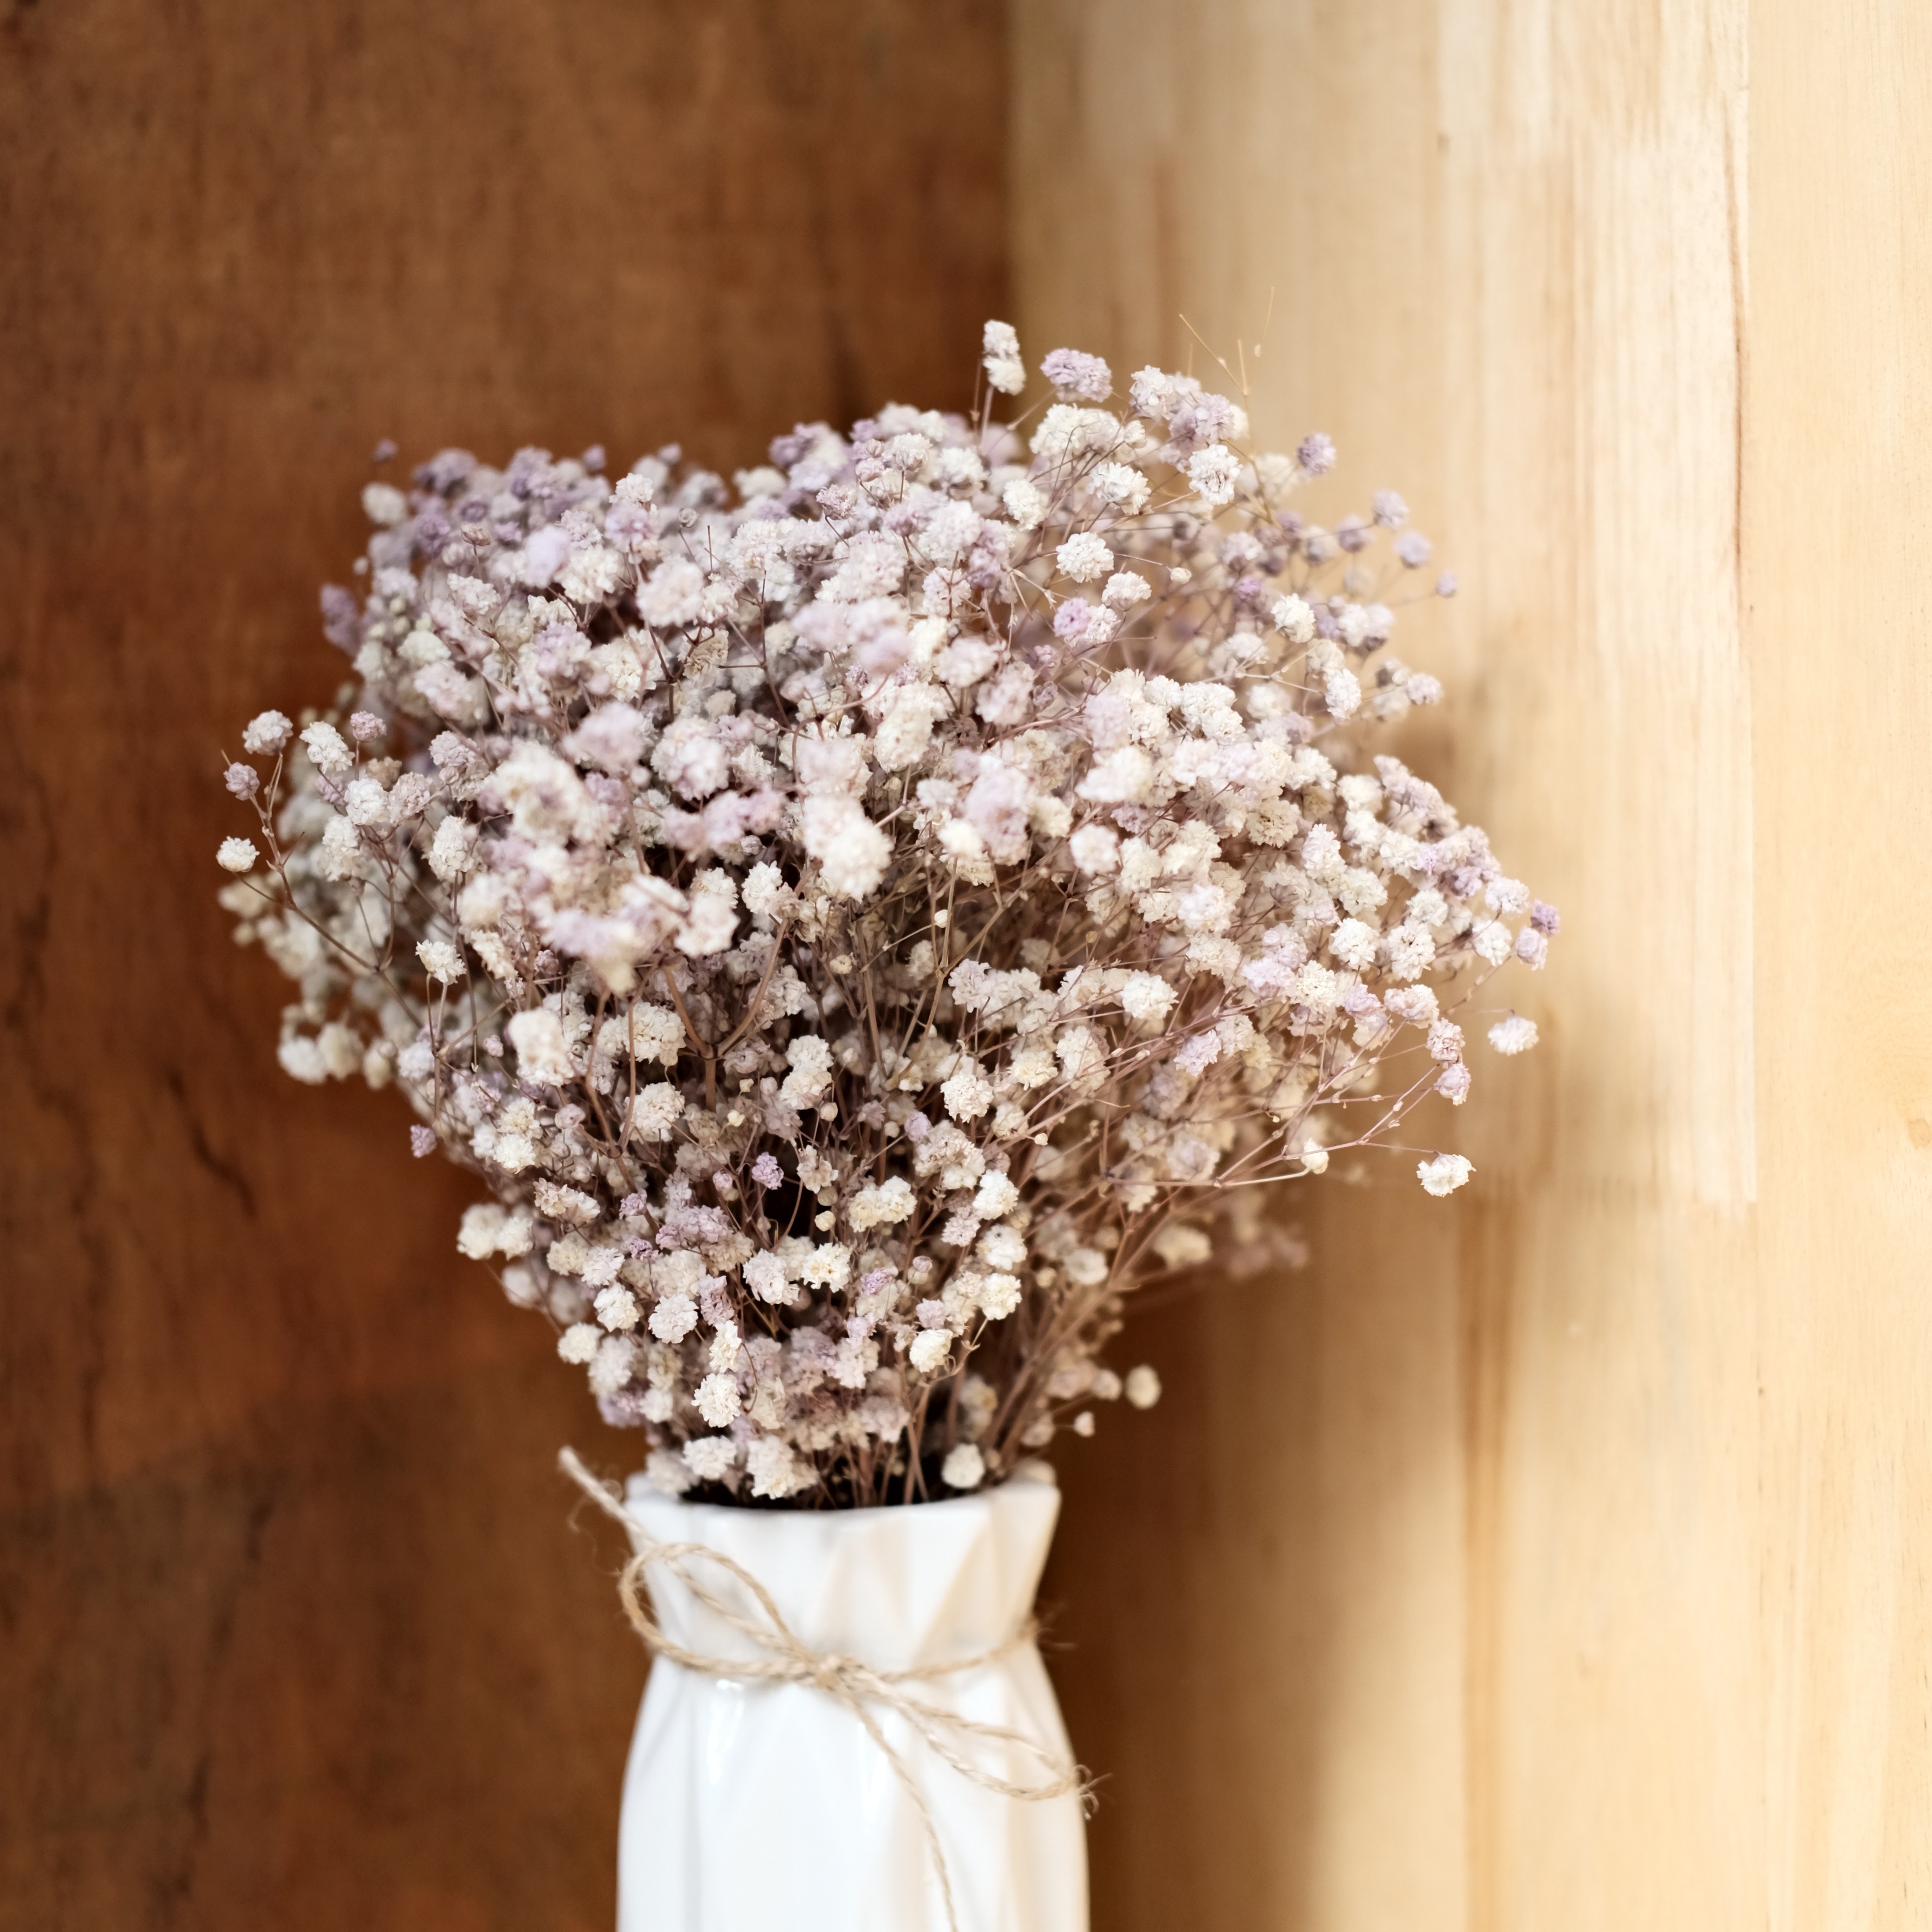 Dried Babys Breath Flowers Bouquet-17 Inch 2500+ Ivory White Dry Flowers,  Natural Gypsophila Branches for Wedding, Table Vase Decor, DIY Wreath